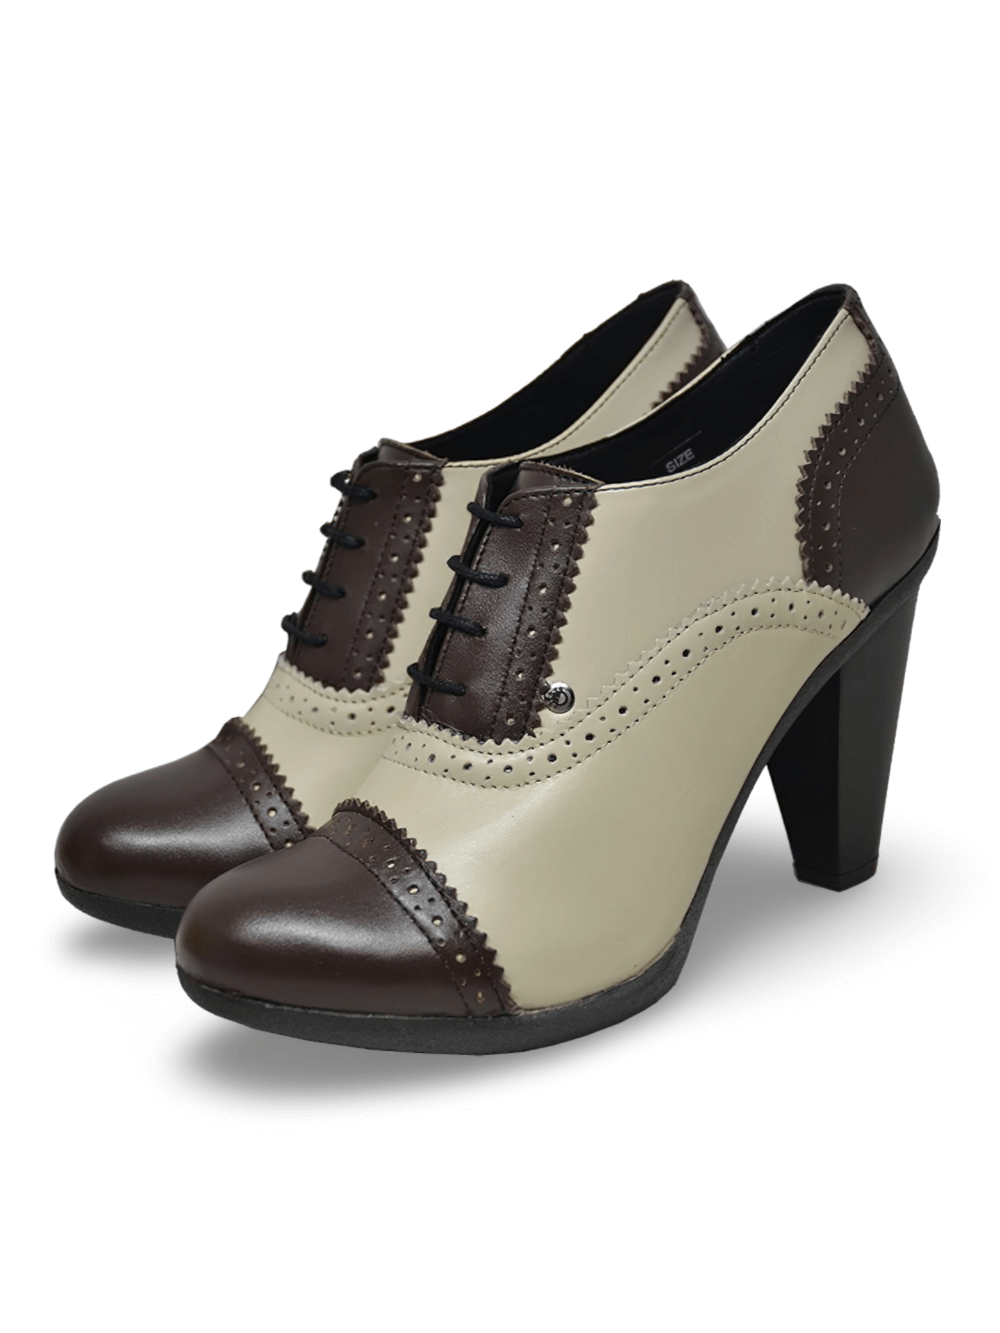 Stylish Women's Two-Tone 8cm Heel Lace-Up Booties